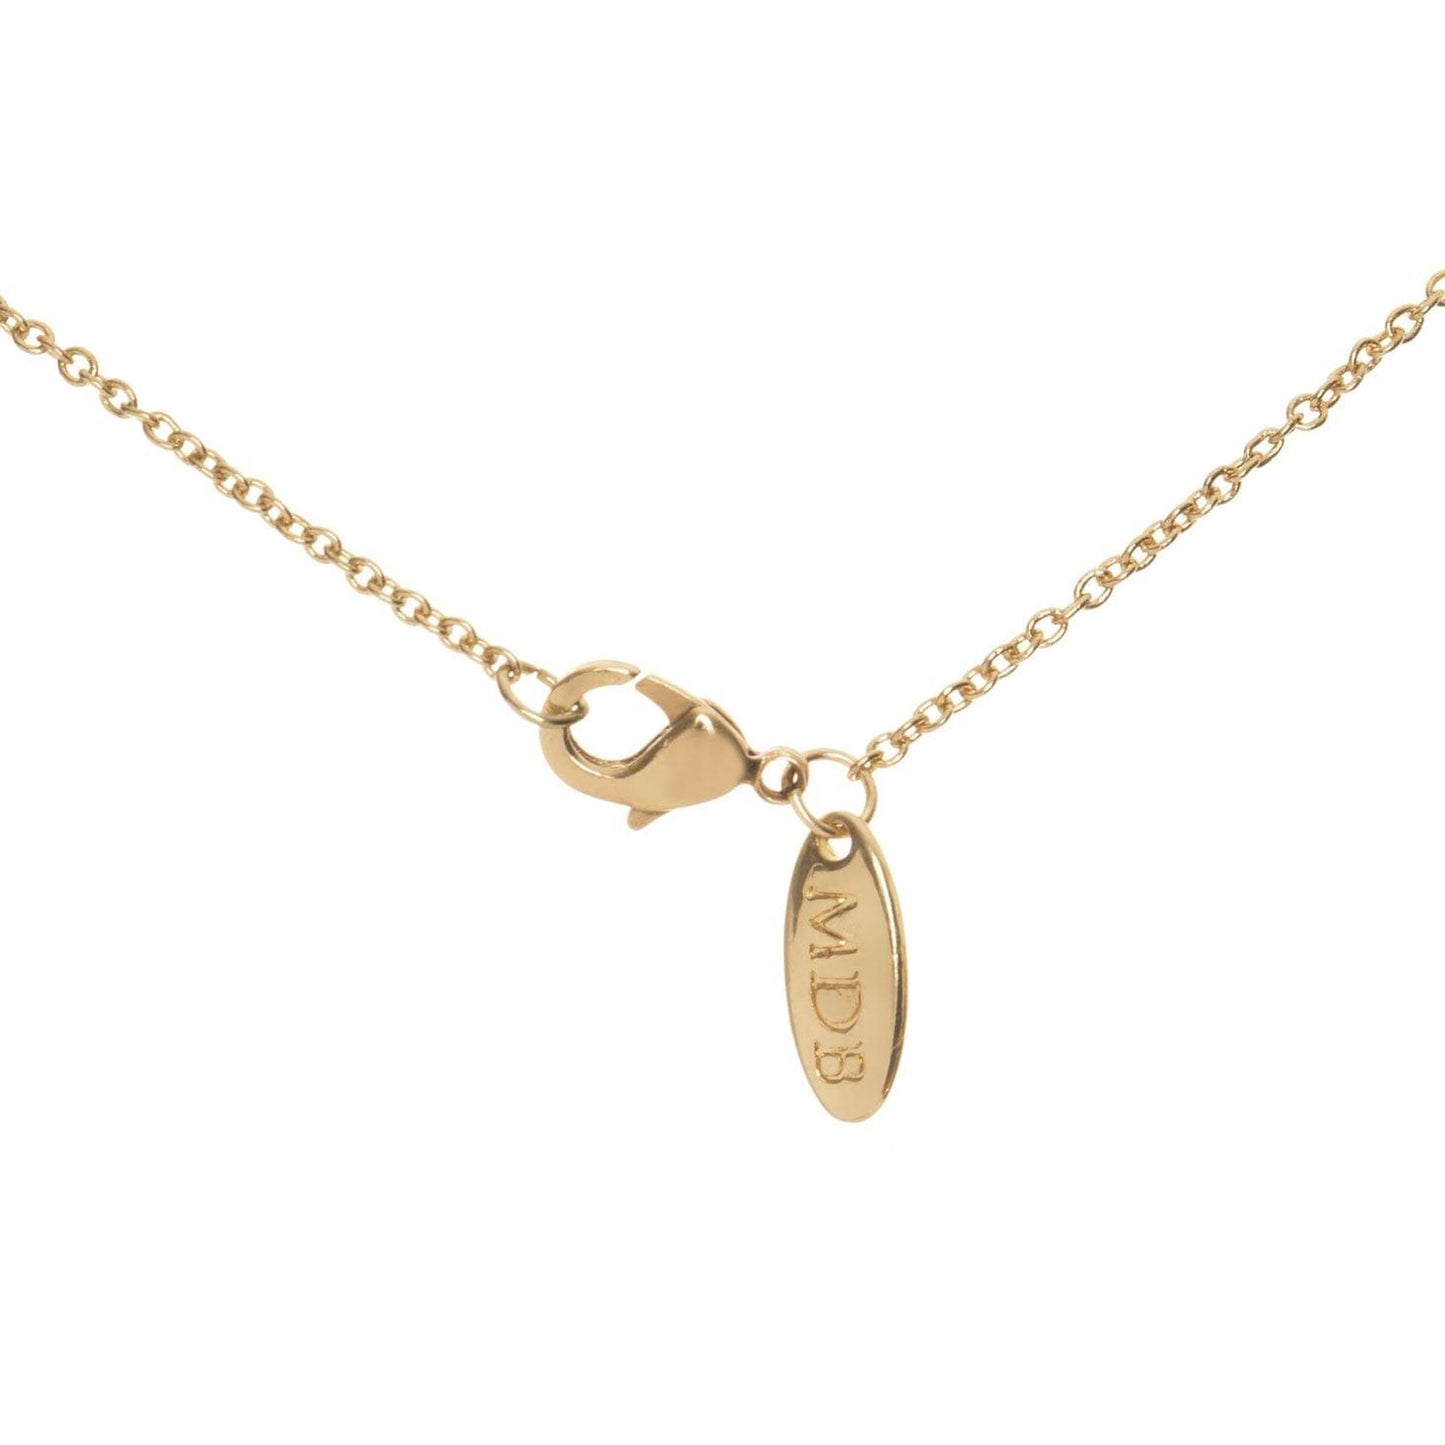 Lumiela Personalized Nameplate Melissa Necklace in Gold Tone